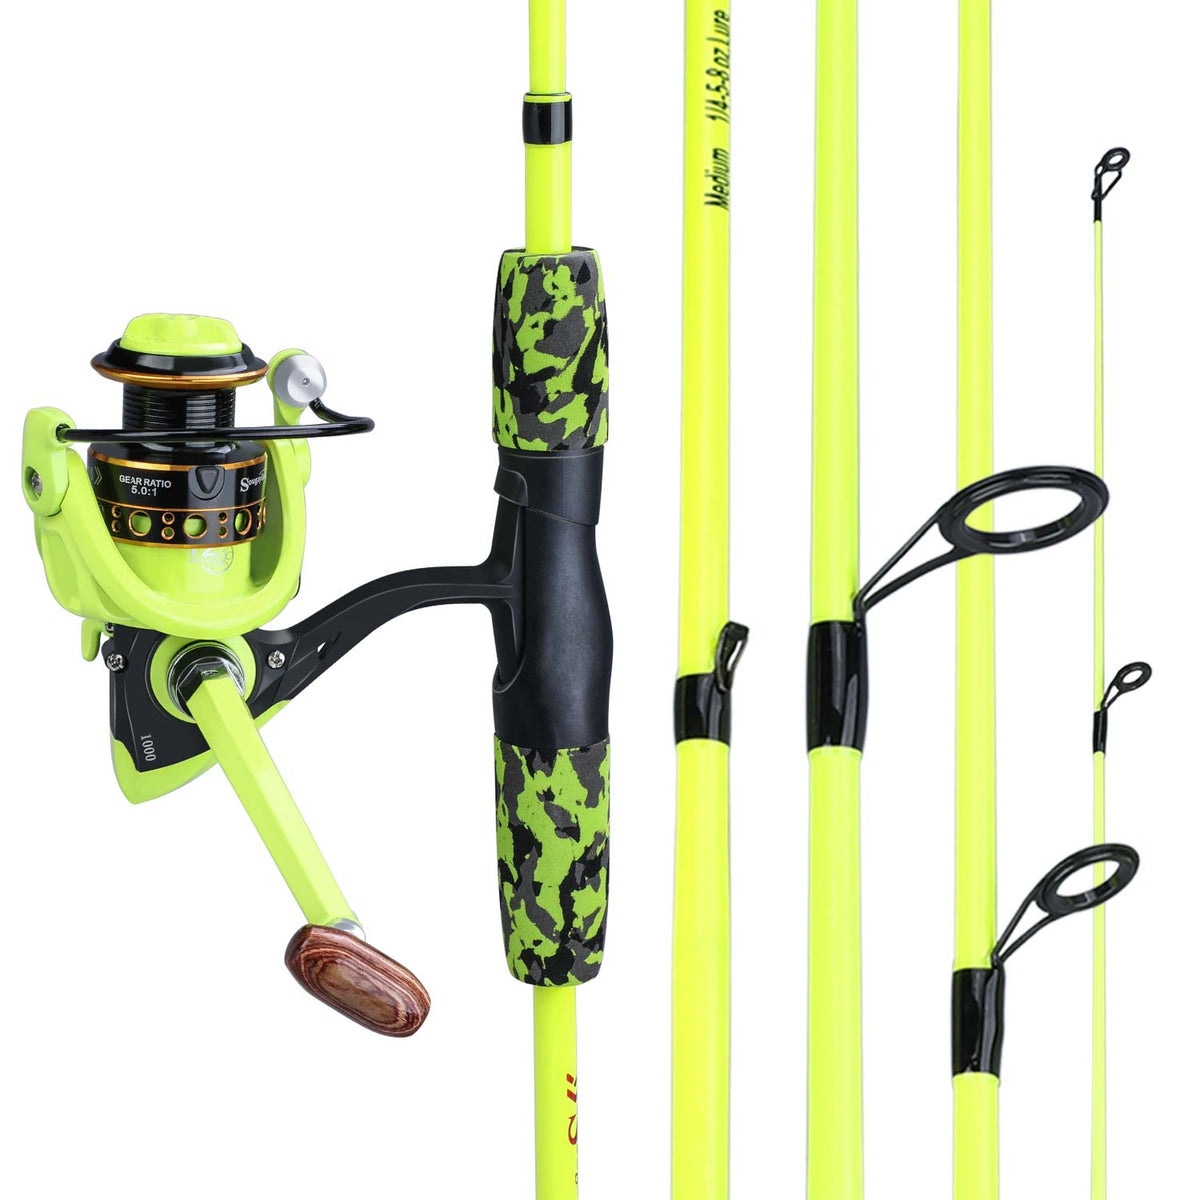 Rod Reel Combo Sougayilang Fly Fishing And Full Kit 5sections